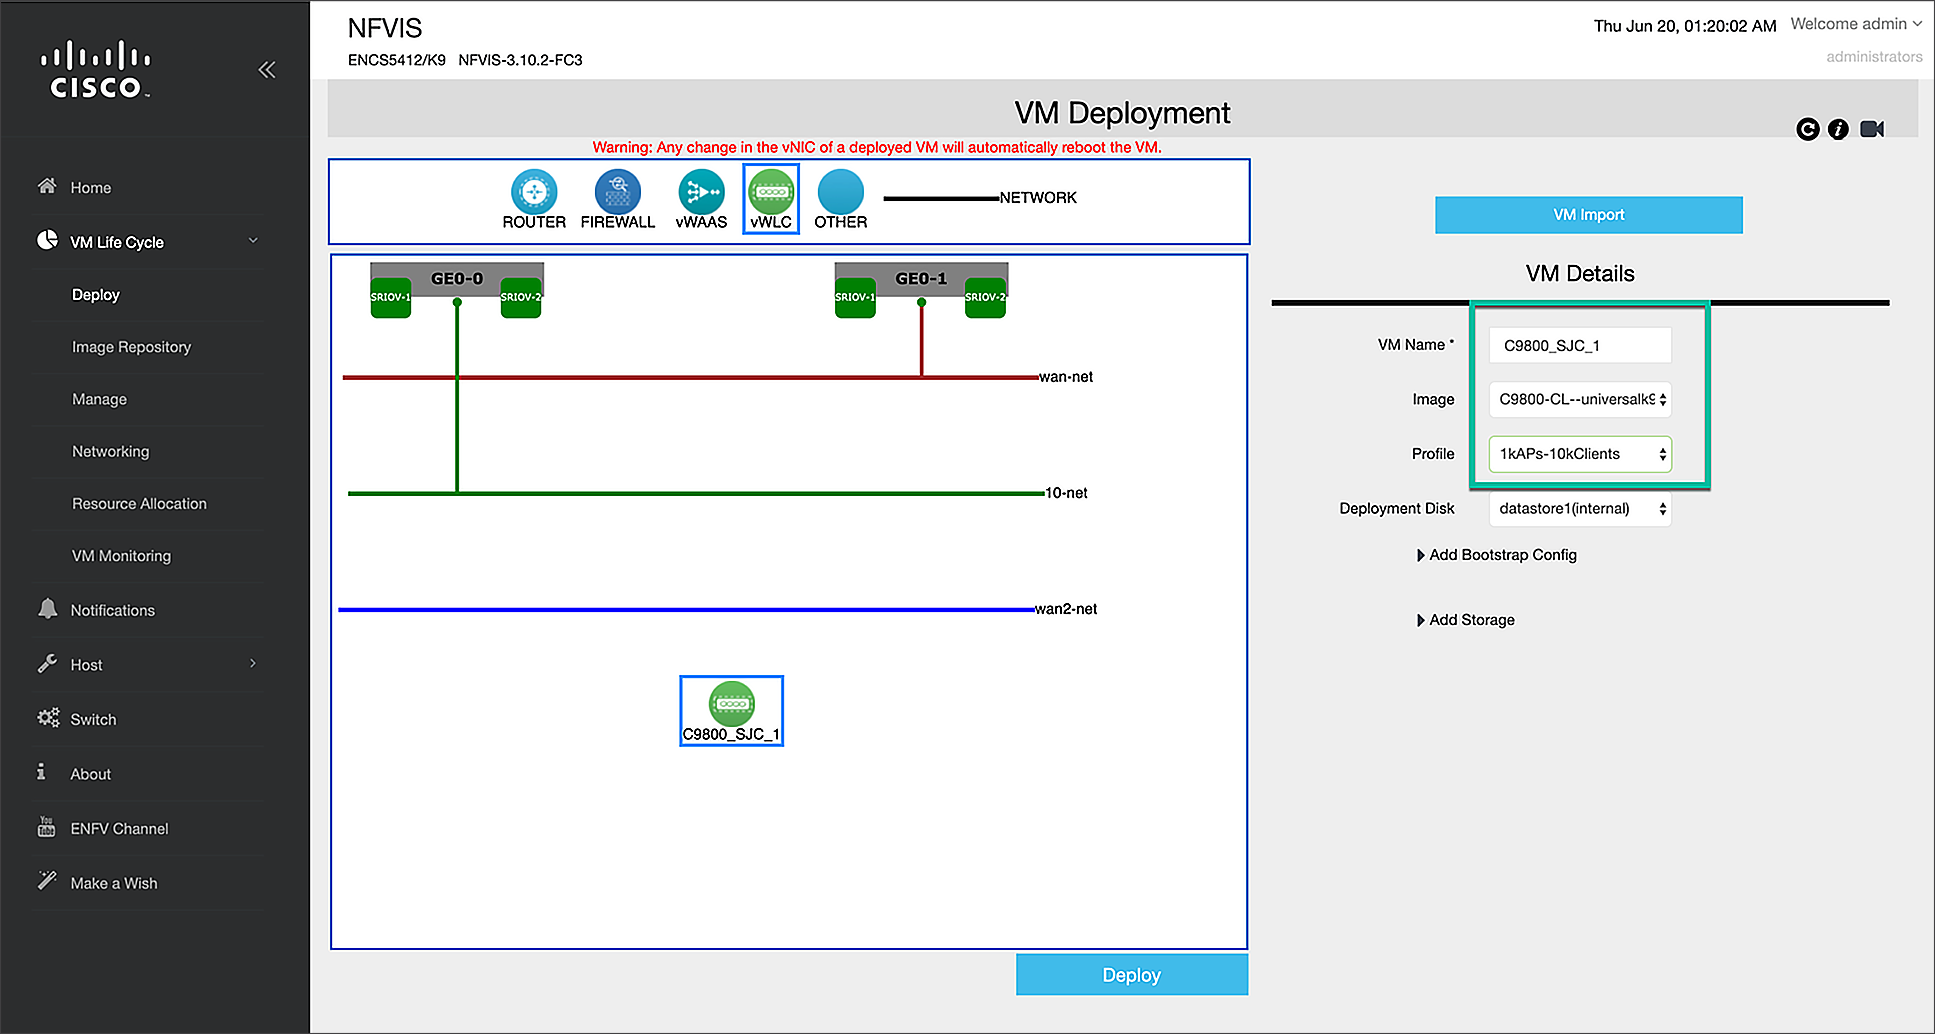 From the VM Deployment window